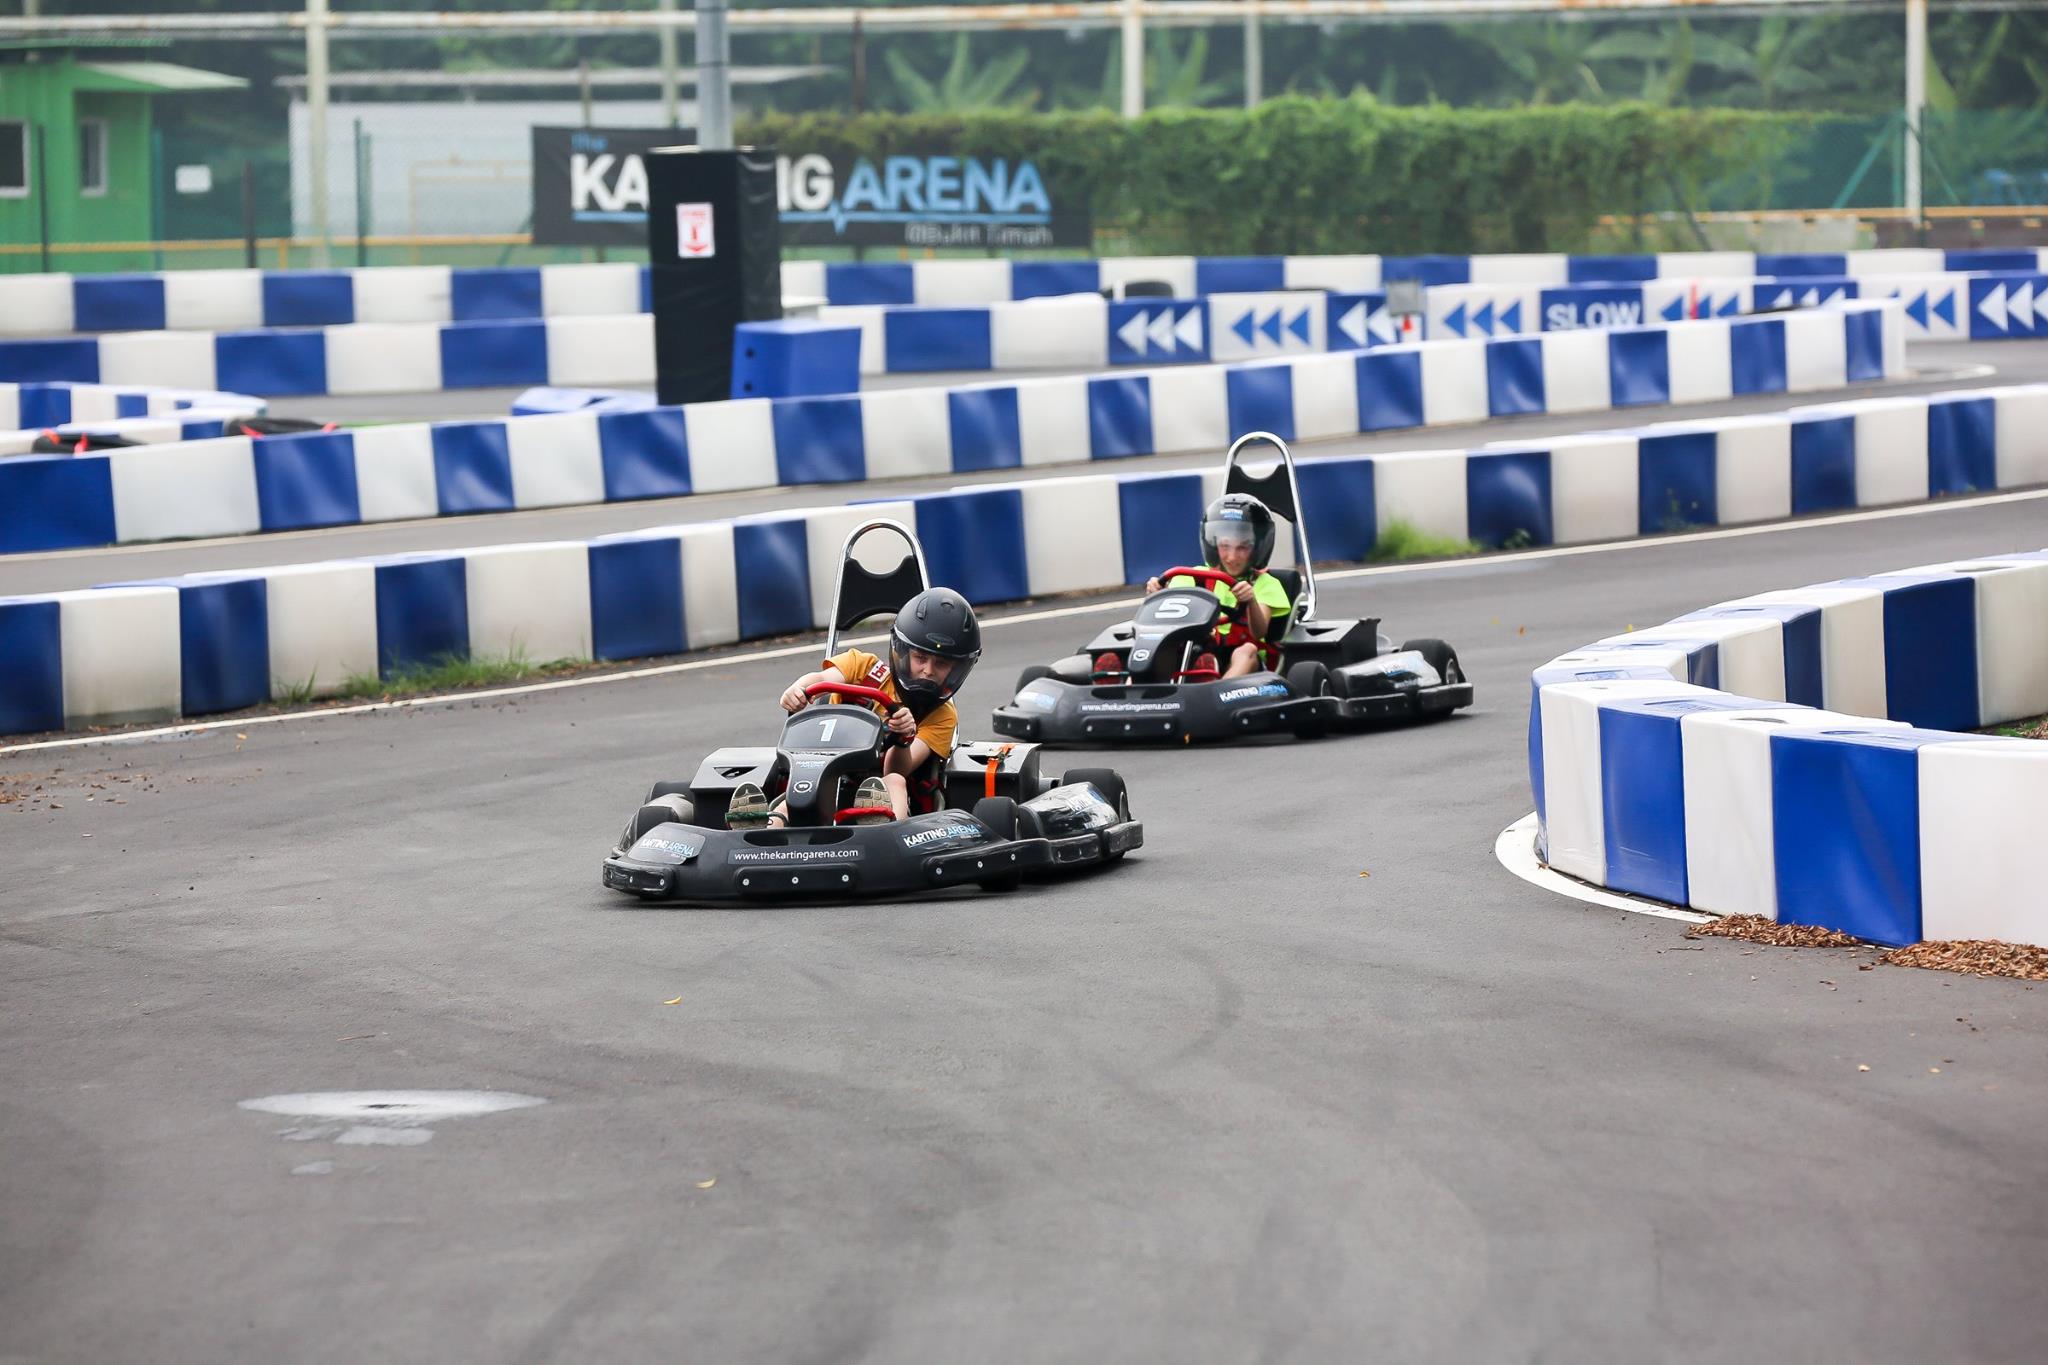 kids riding at the go kart circuit at the karting arena, north west of singapore